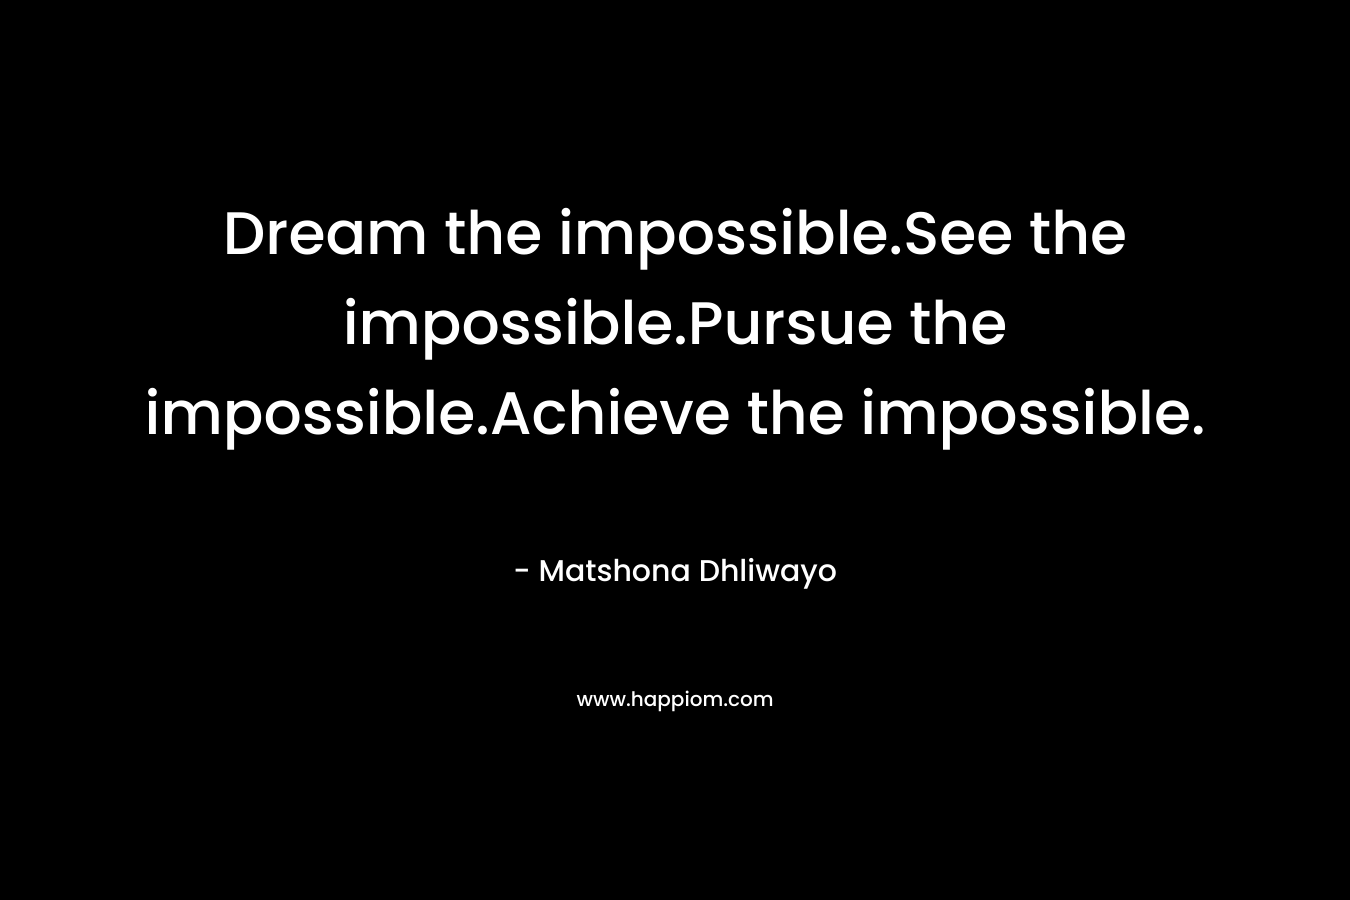 Dream the impossible.See the impossible.Pursue the impossible.Achieve the impossible.